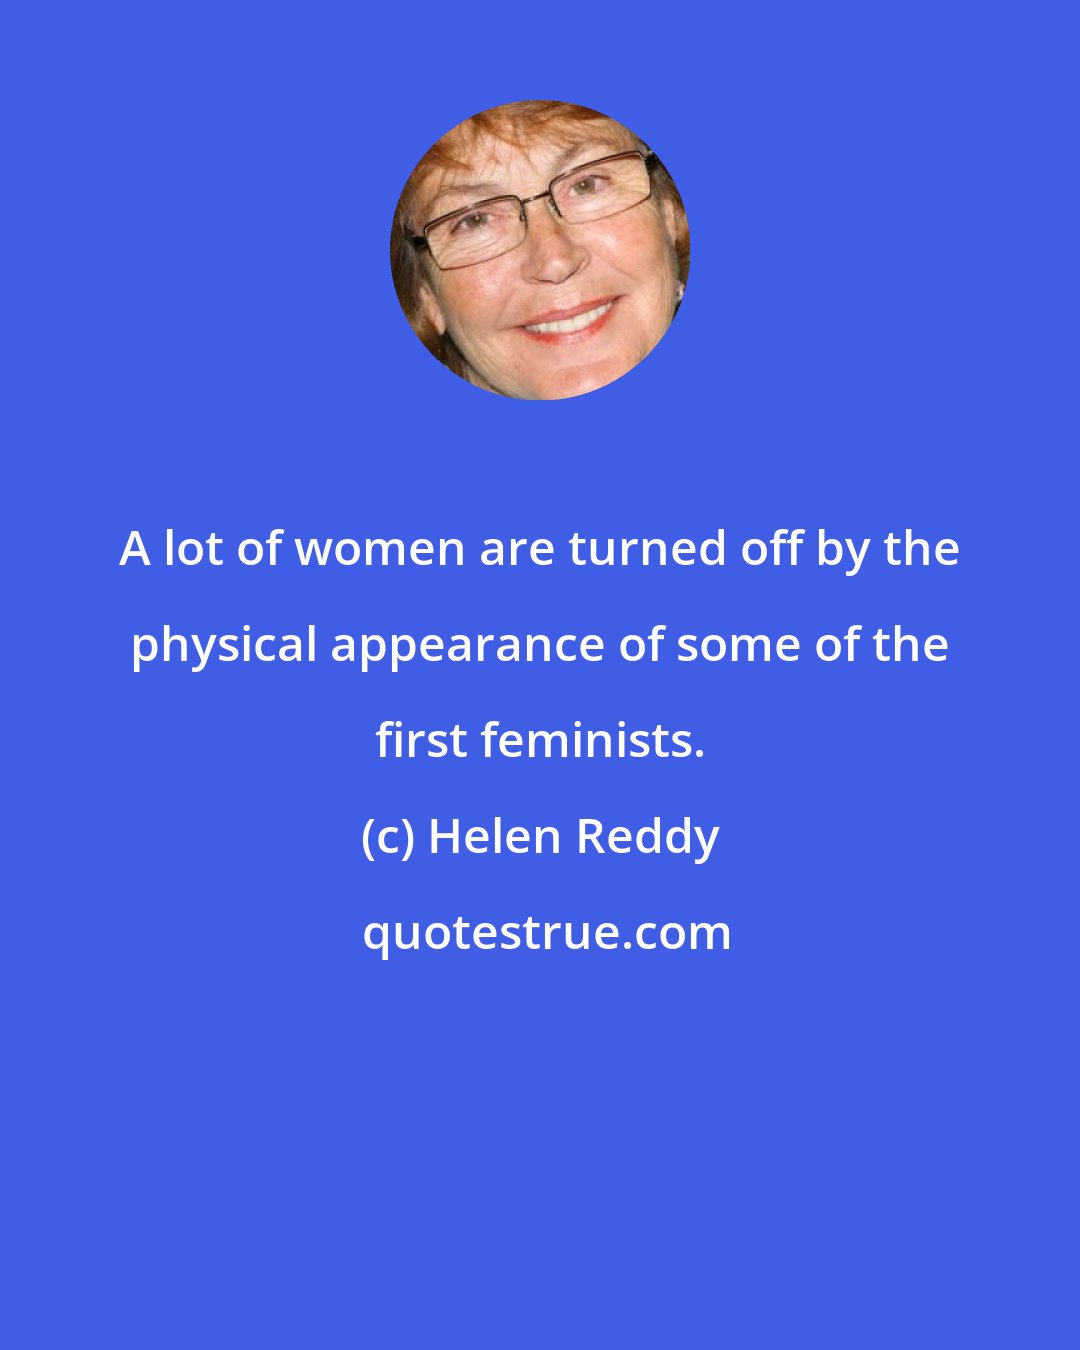 Helen Reddy: A lot of women are turned off by the physical appearance of some of the first feminists.